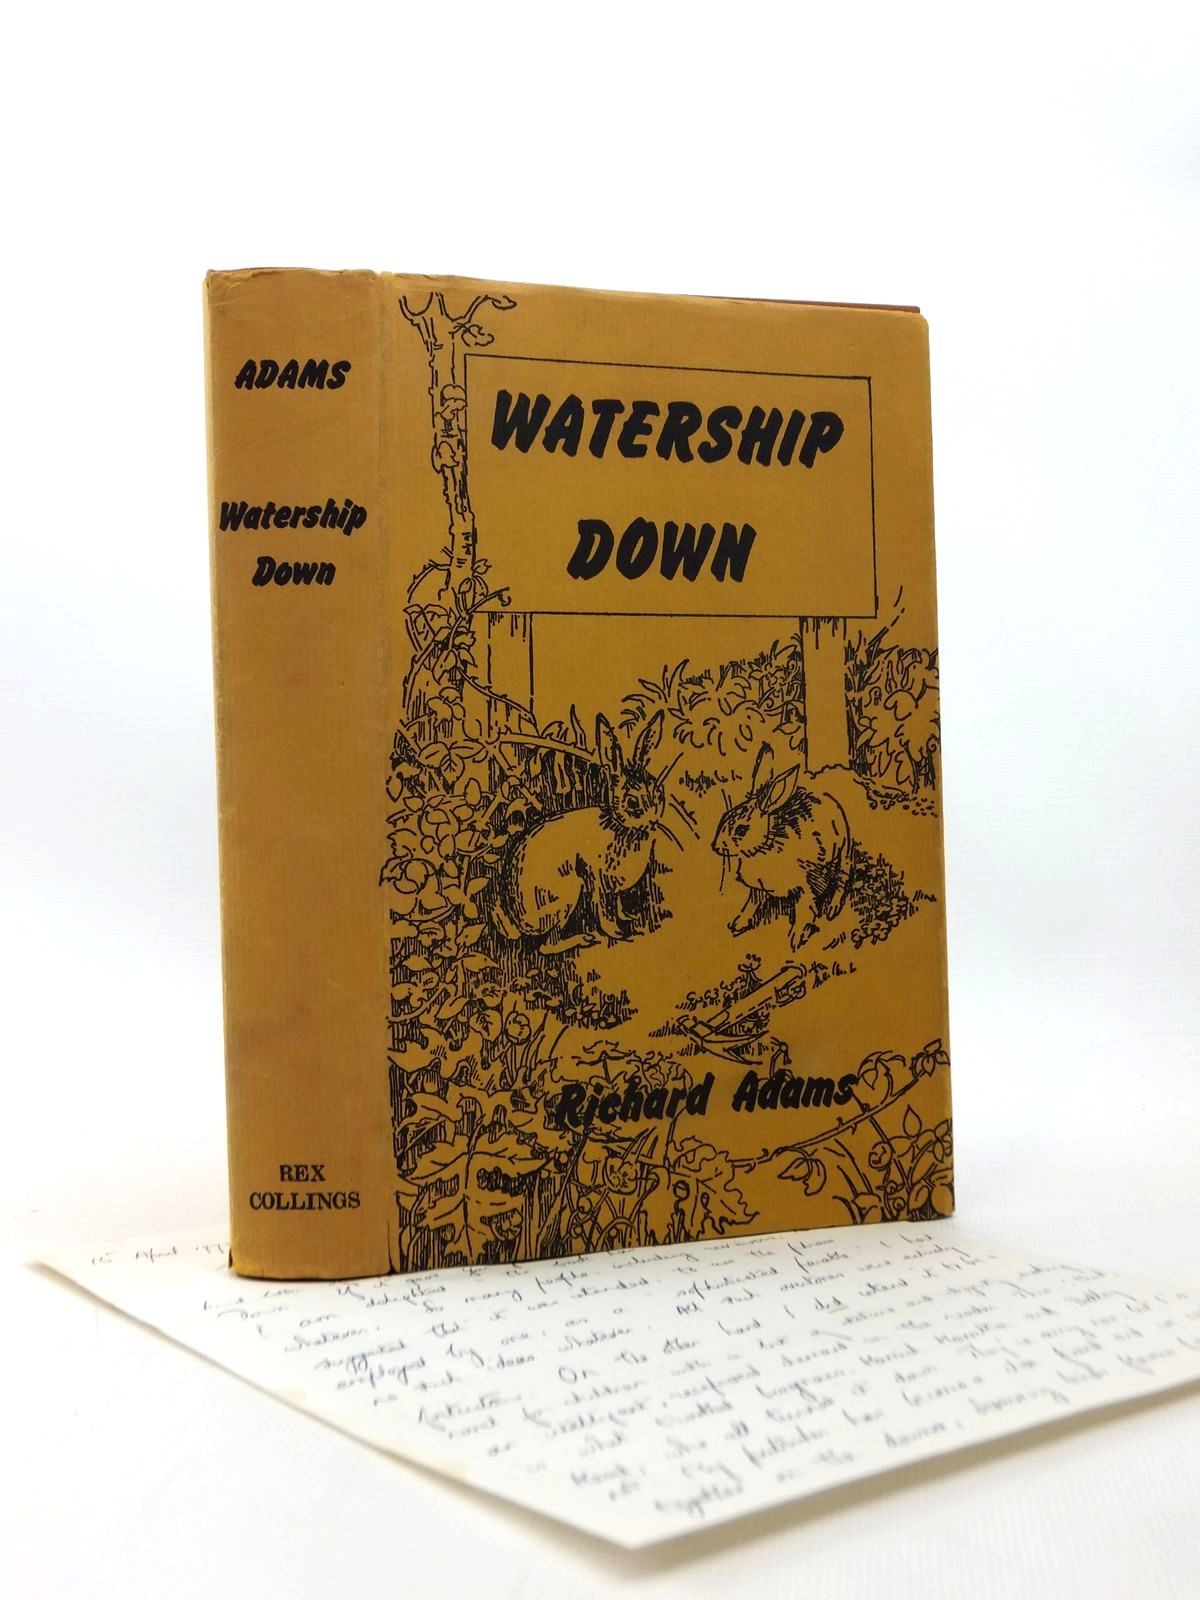 Watership Down cover illustration